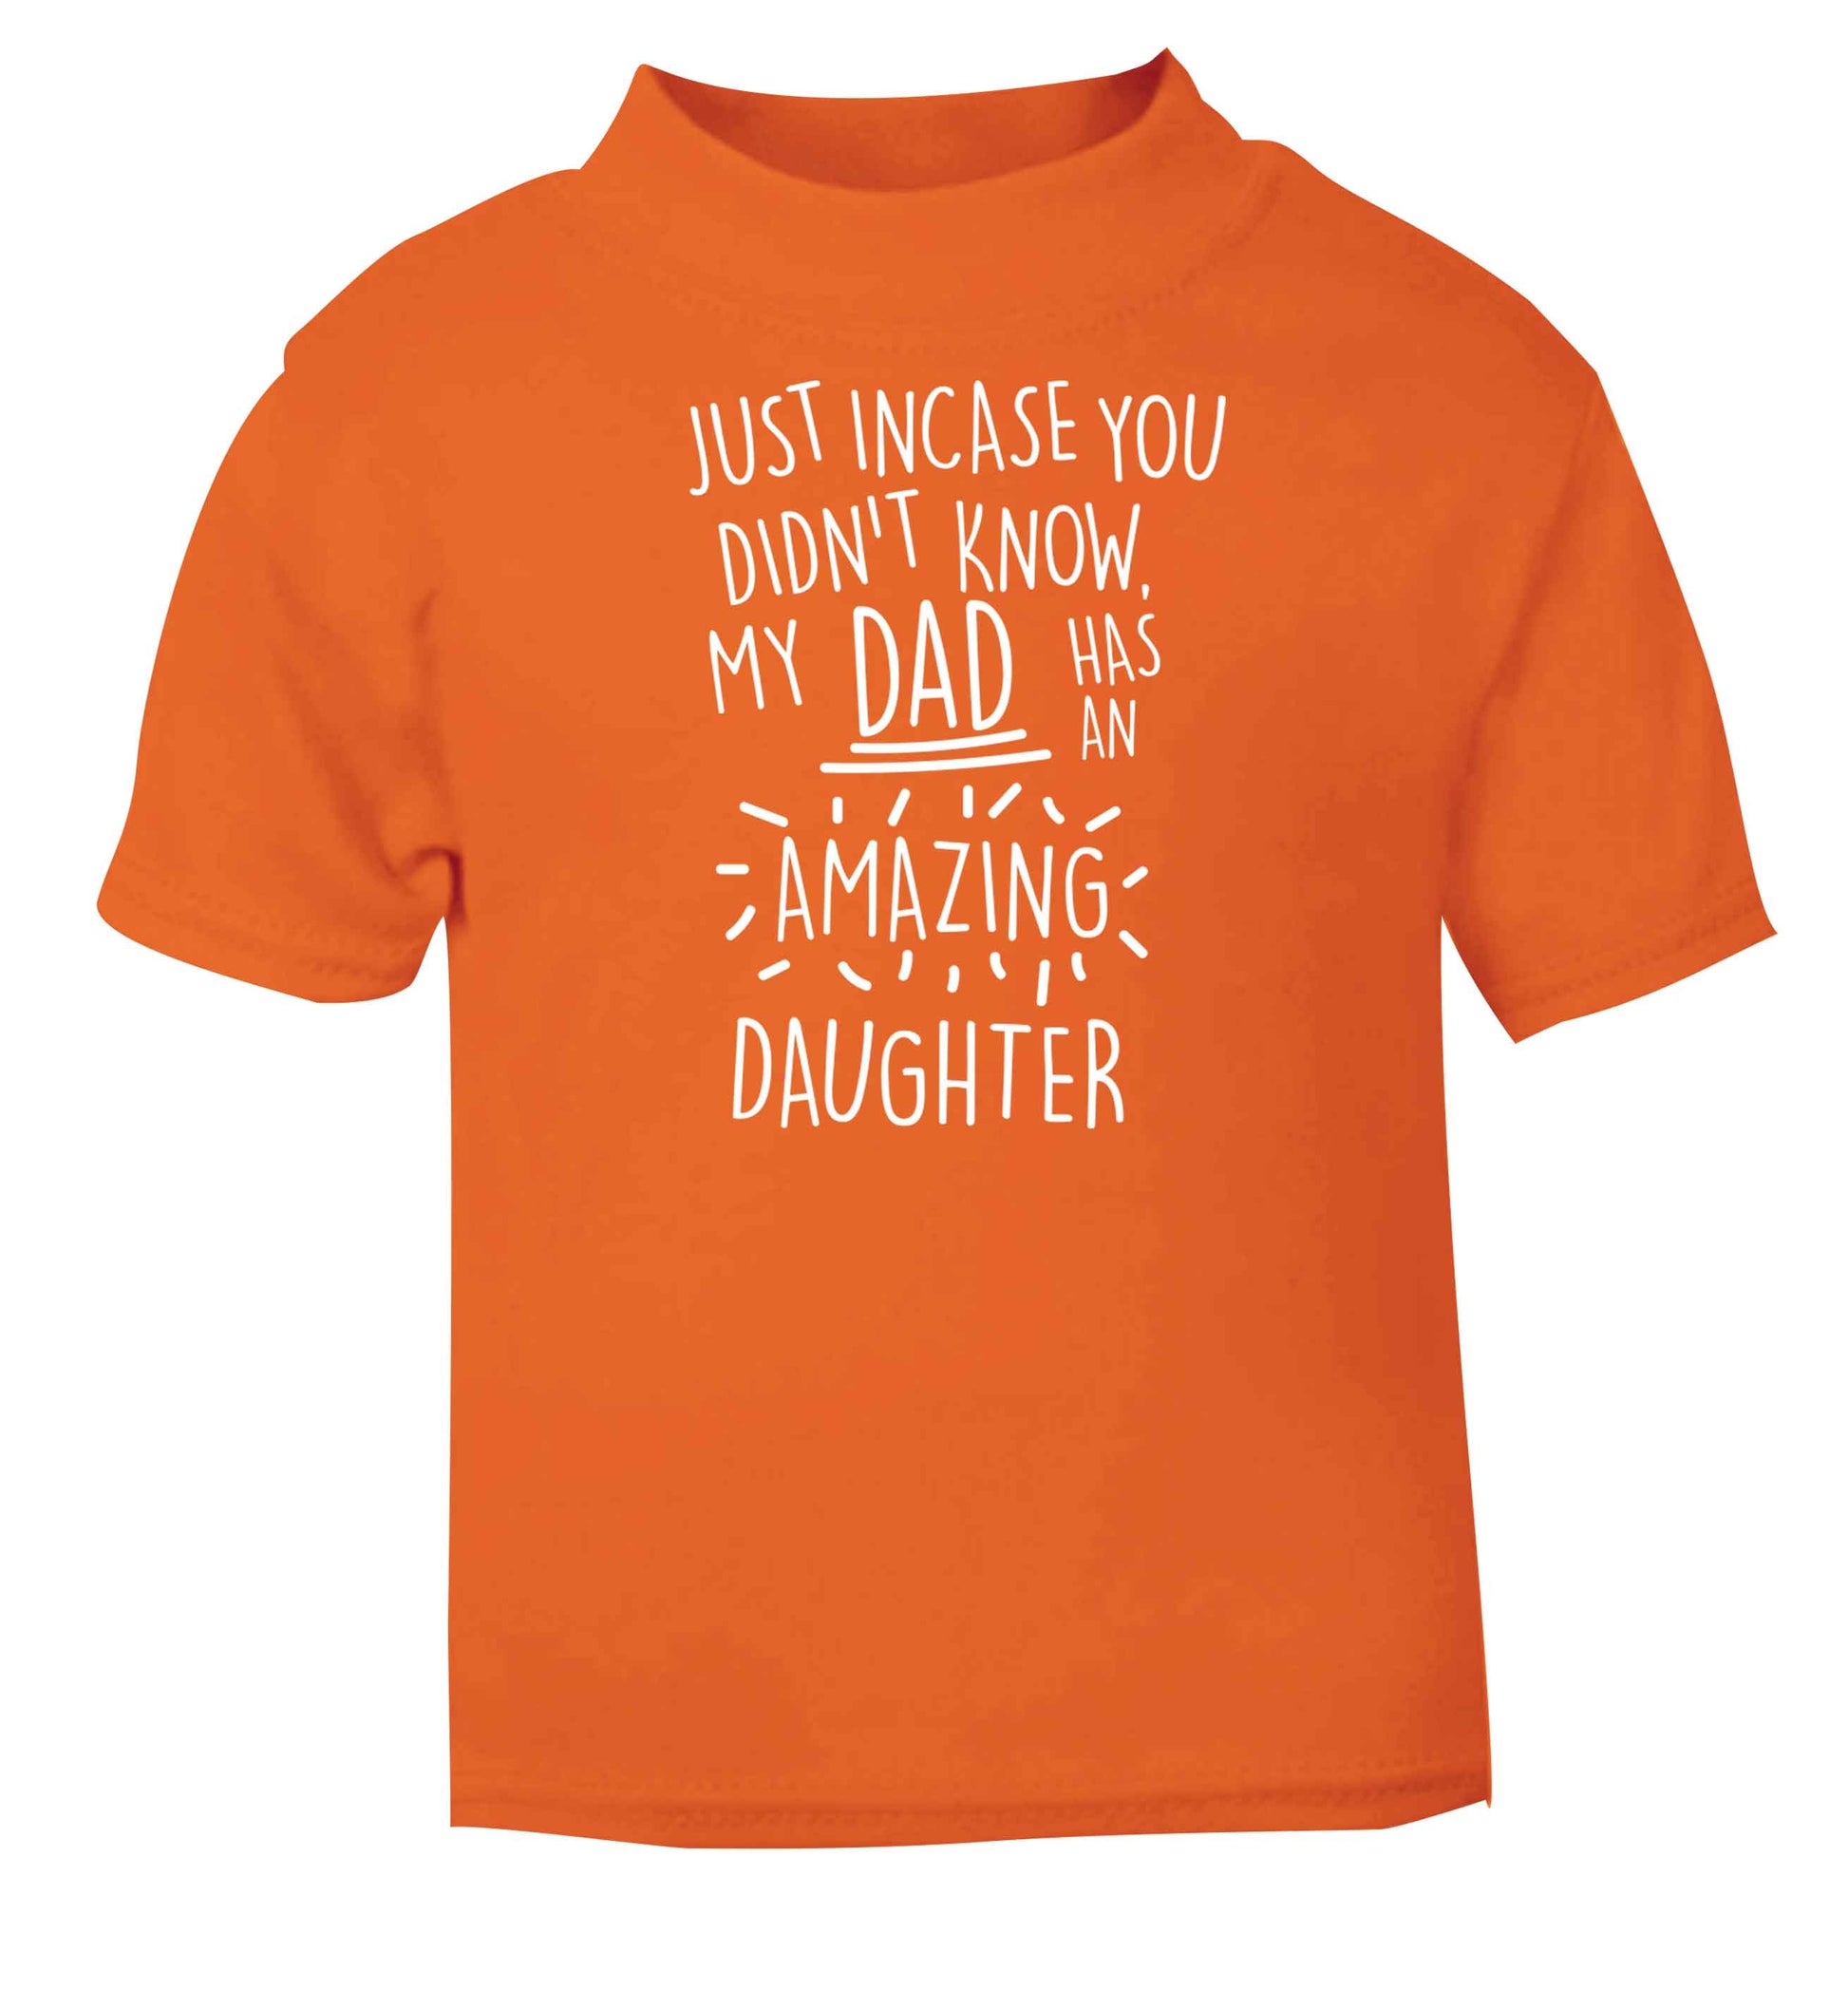 Just incase you didn't know my dad has an amazing daughter orange baby toddler Tshirt 2 Years